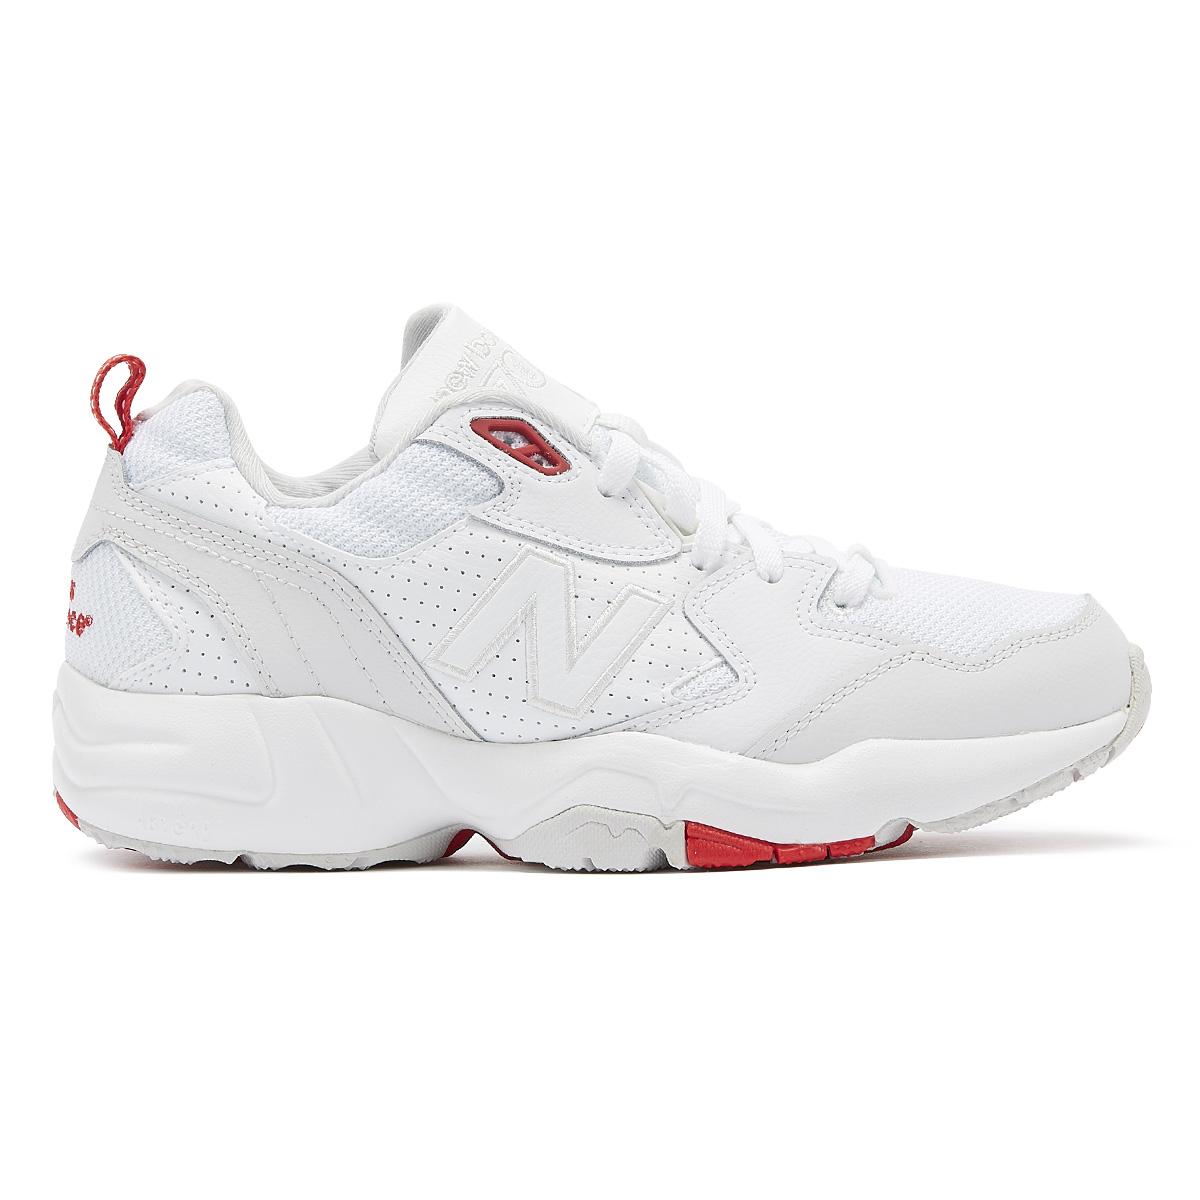 New Balance Leather 708 S White/grey/red Trainers - Lyst